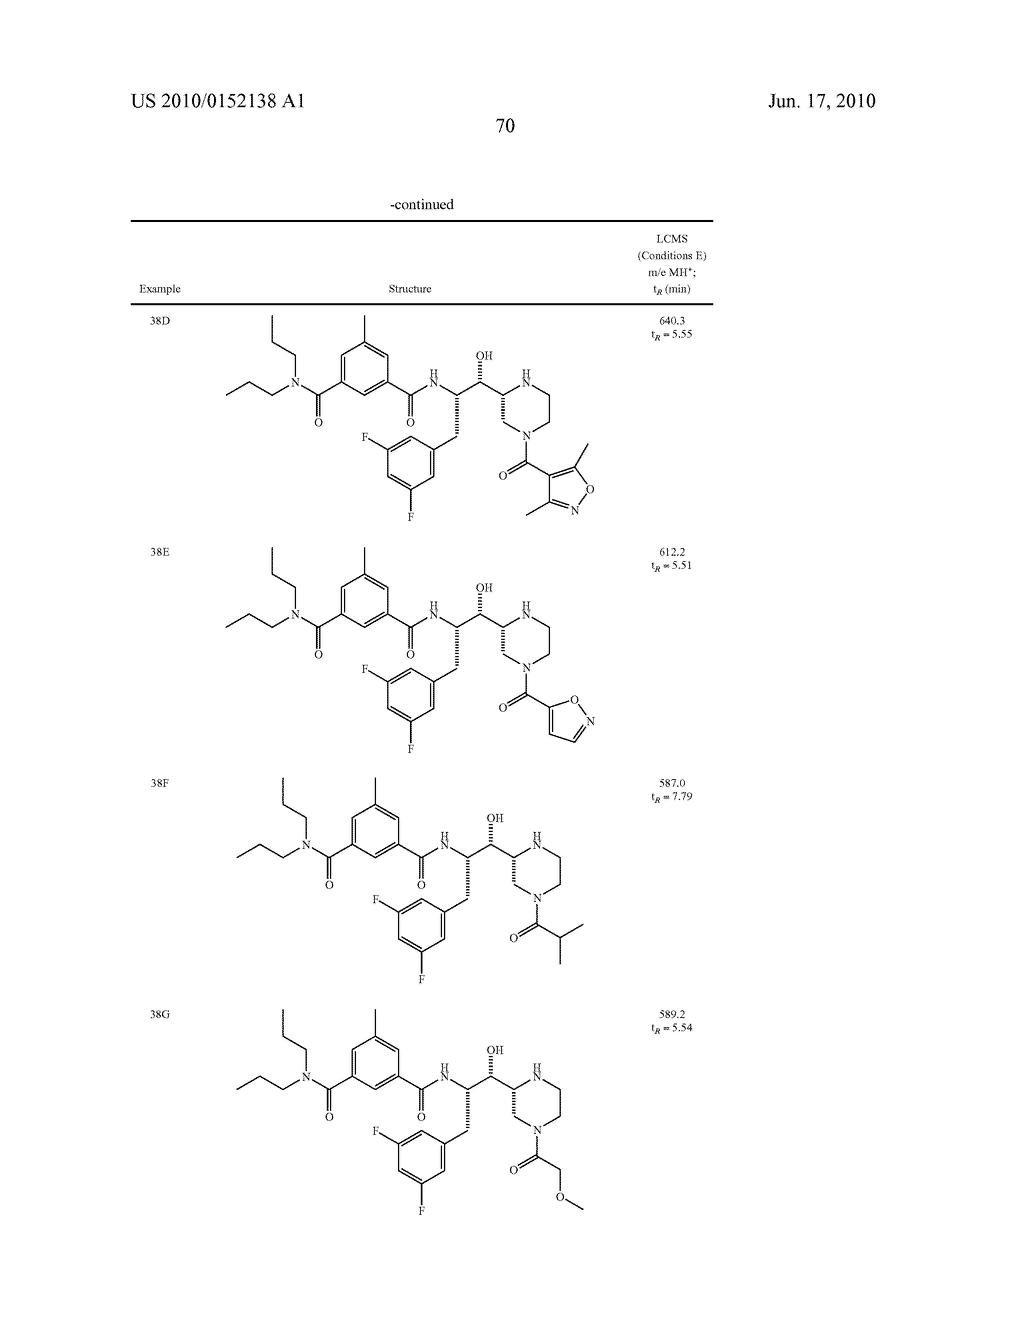 CYCLIC AMINE BACE-1 INHIBITORS HAVING A BENZAMIDE SUBSTITUENT - diagram, schematic, and image 71